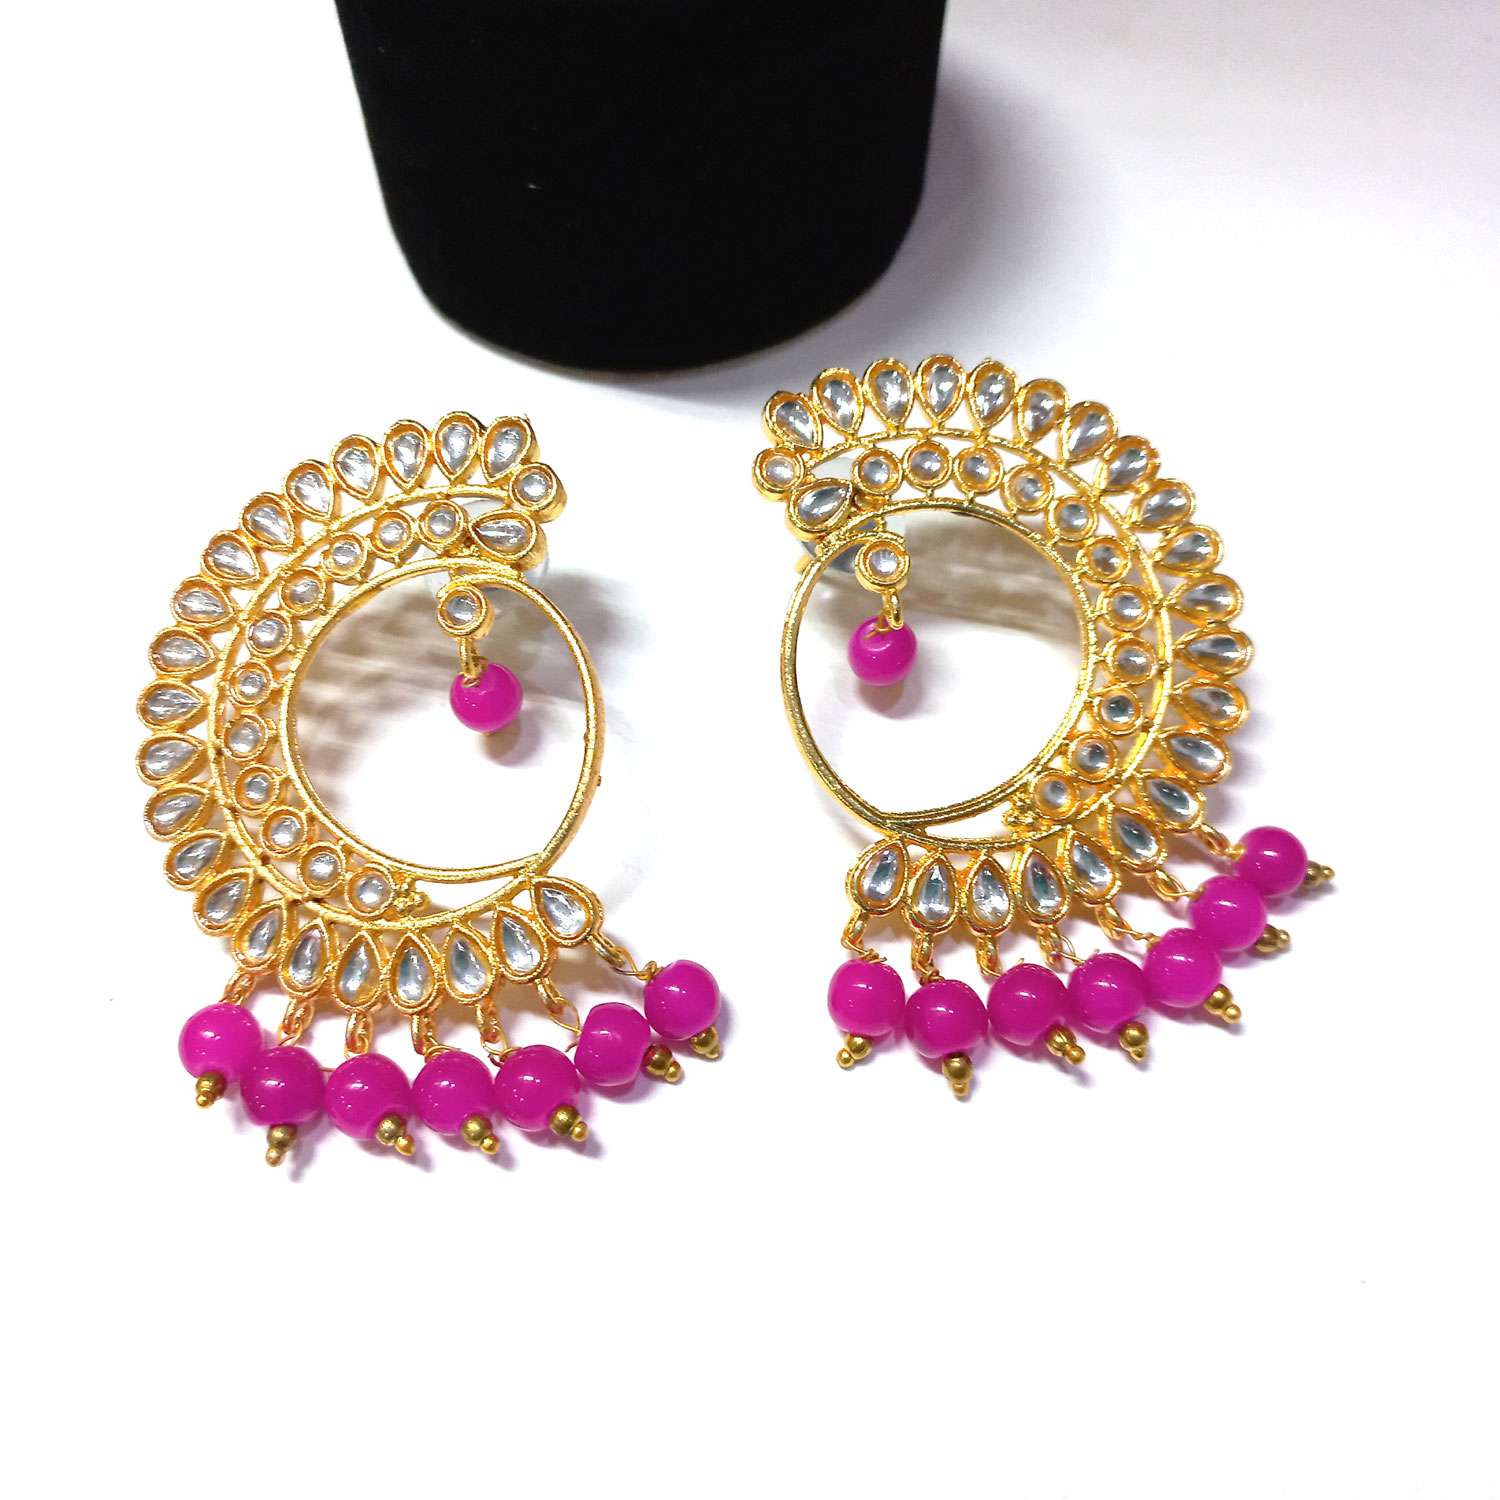 DESI COLOUR Pink Gold-Toned Handcrafted Circular Drop Earrings – Desi Colour